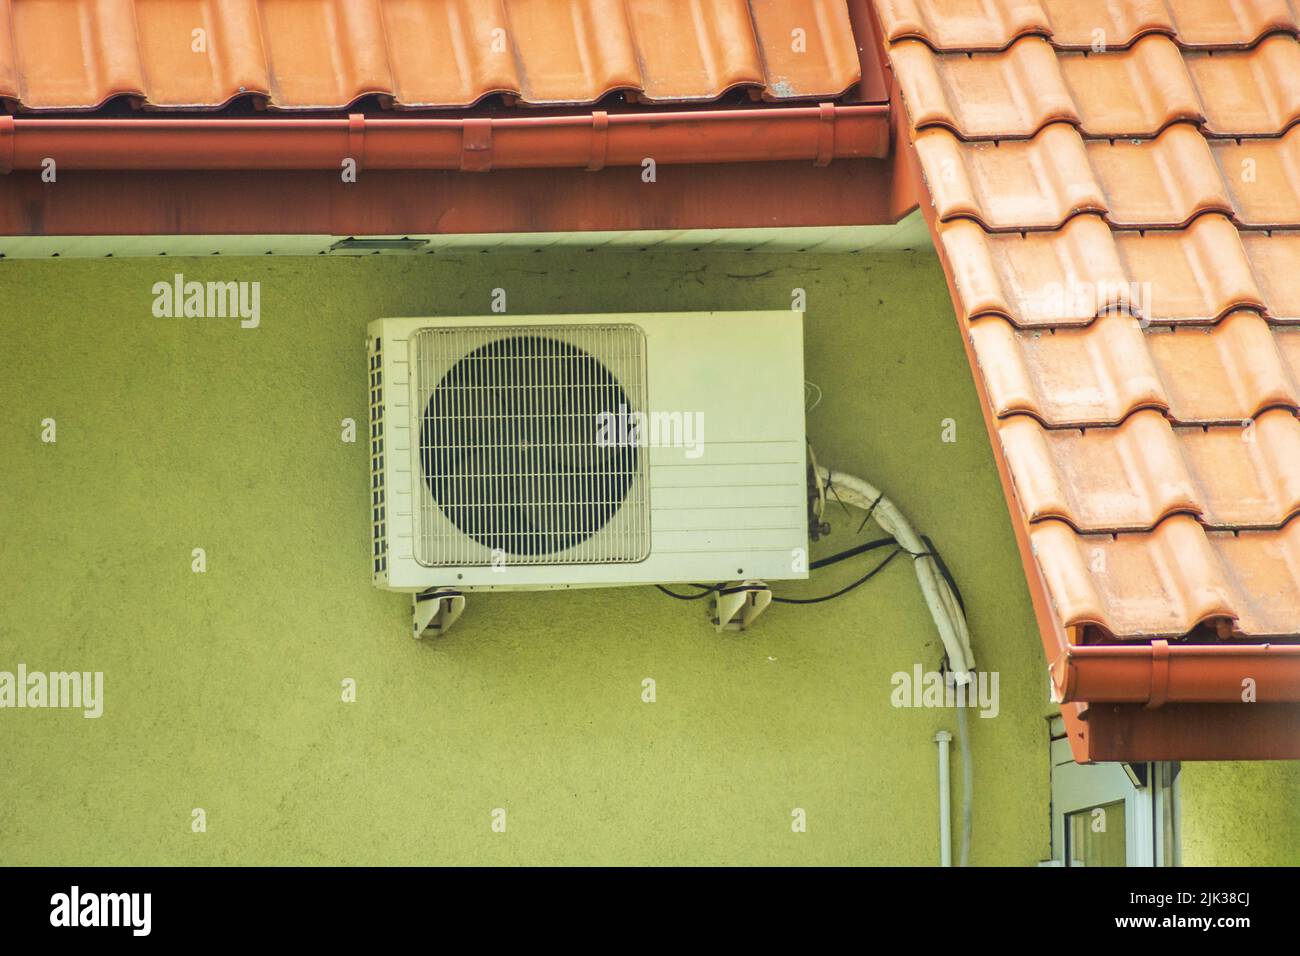 Air conditioner hanging on the wall of the building Stock Photo